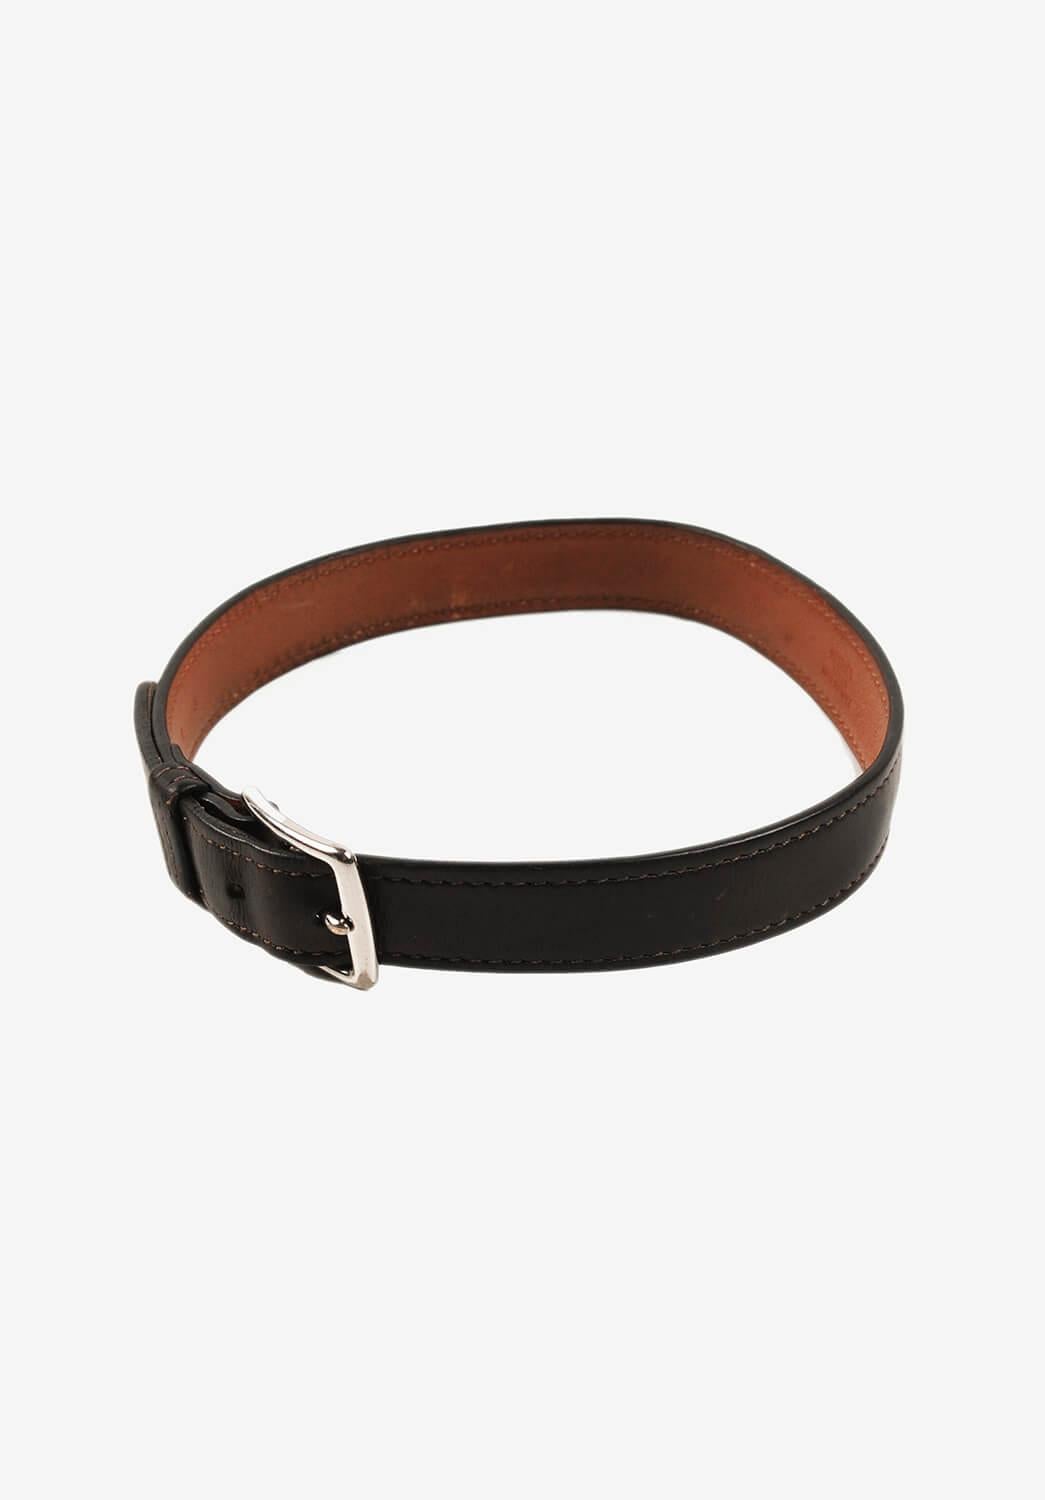 Hermes Leather bracelet for men or women
Color: Brown
(An actual color may a bit vary due to individual computer screen interpretation)
Material: leather
Tag size: Medium
This belt is great quality item. Rate 8.5 of 10, very good used